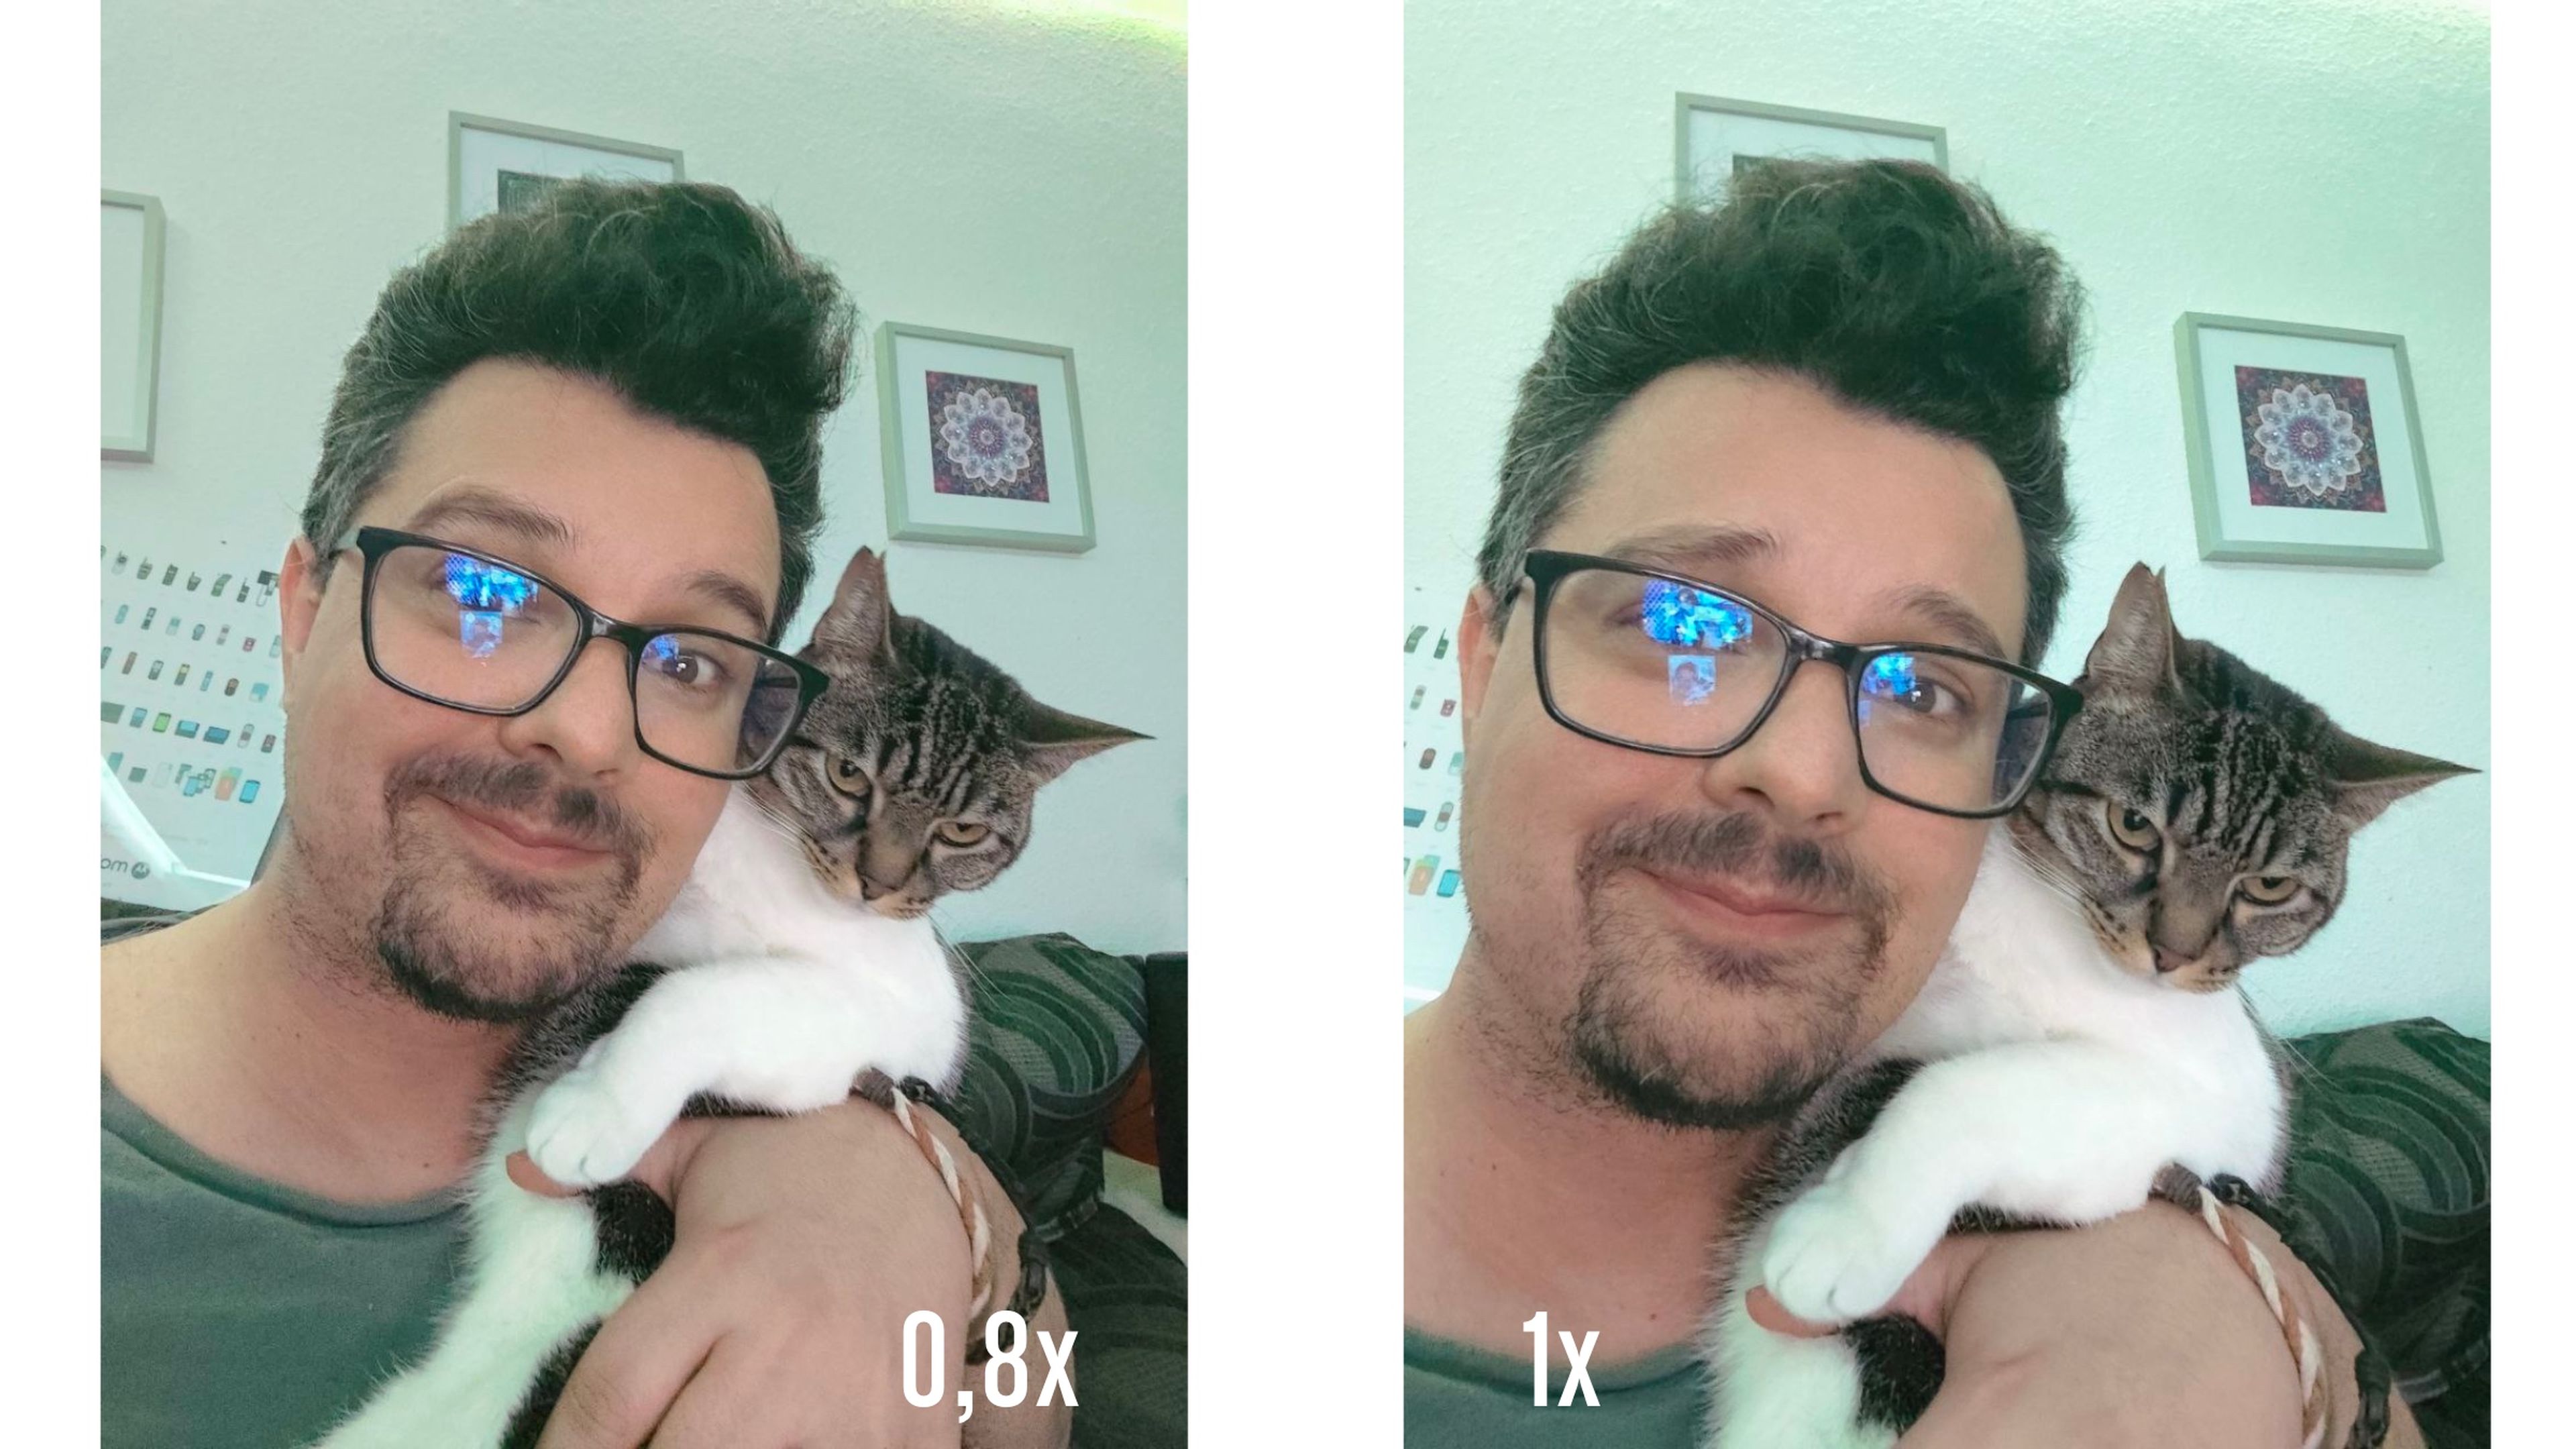 Focal difference between Selfie 0.8 and 1x